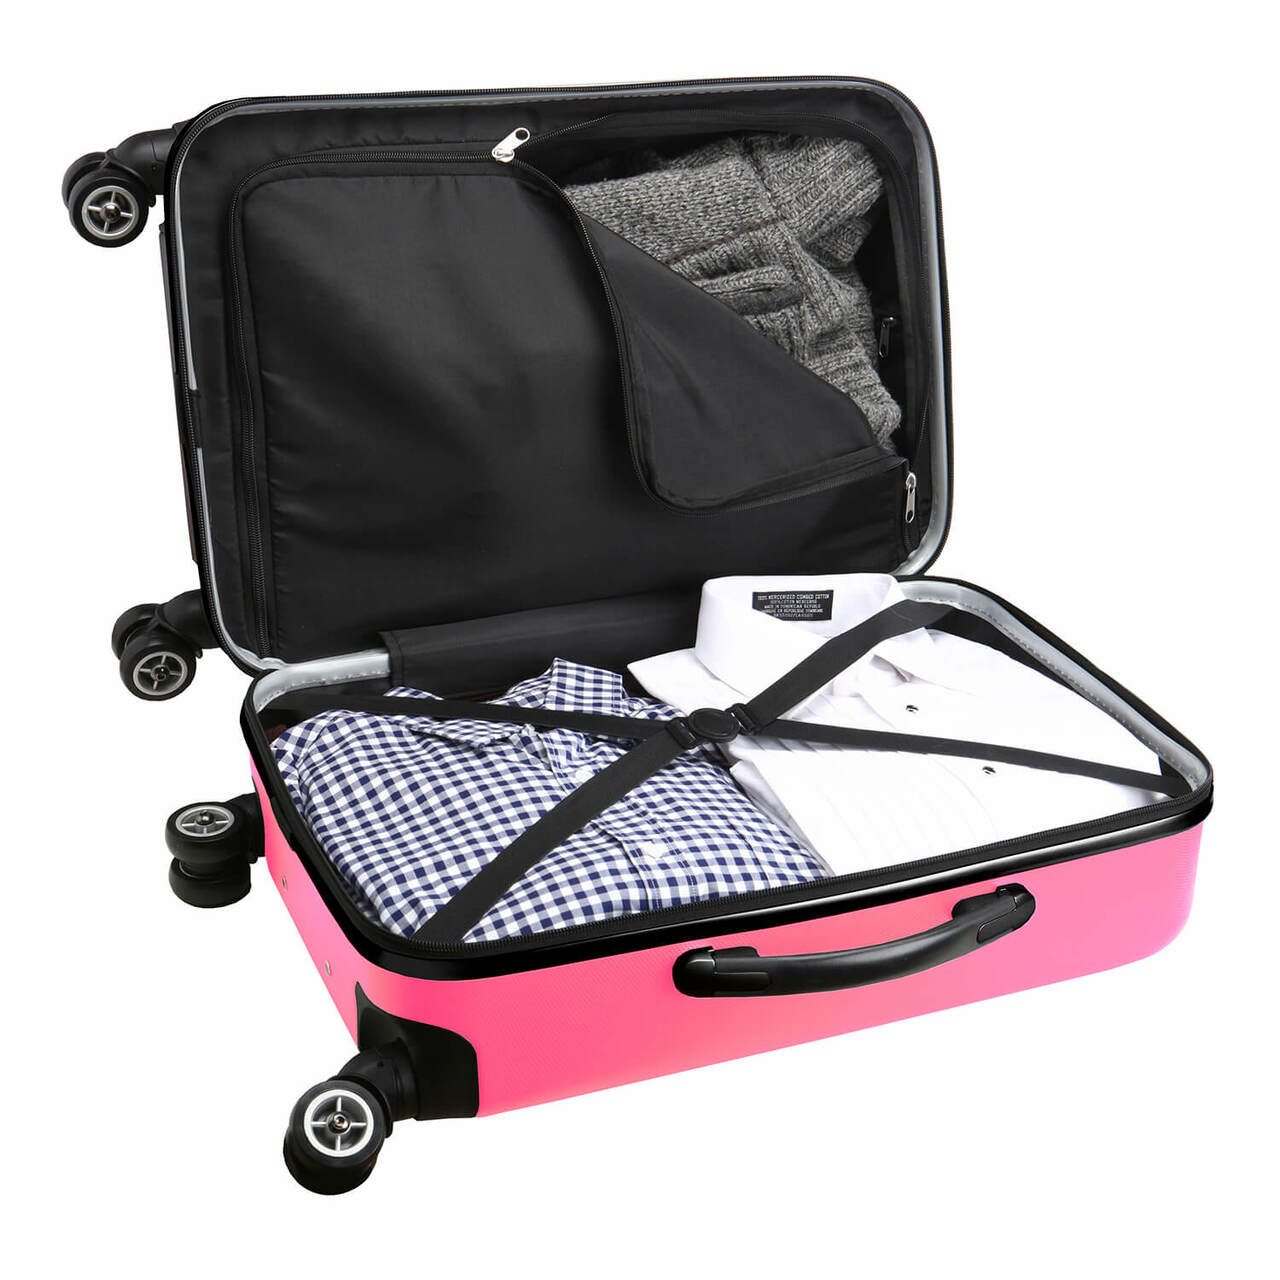 Sacramento Kings 20" Pink Domestic Carry-on Spinner